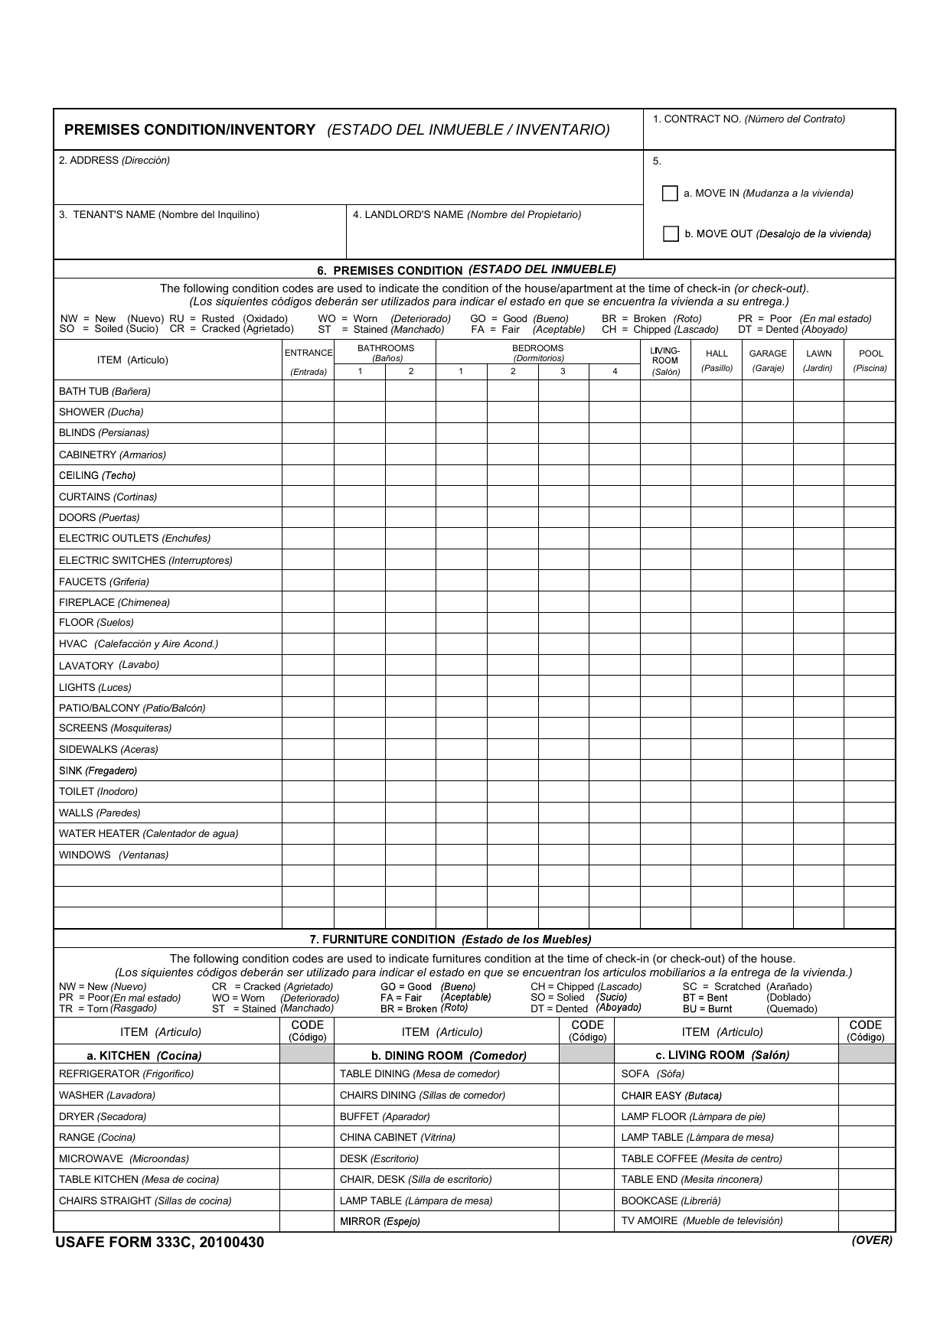 USAFE Form 333C Premises Condition / Inventory (English / Spanish), Page 1